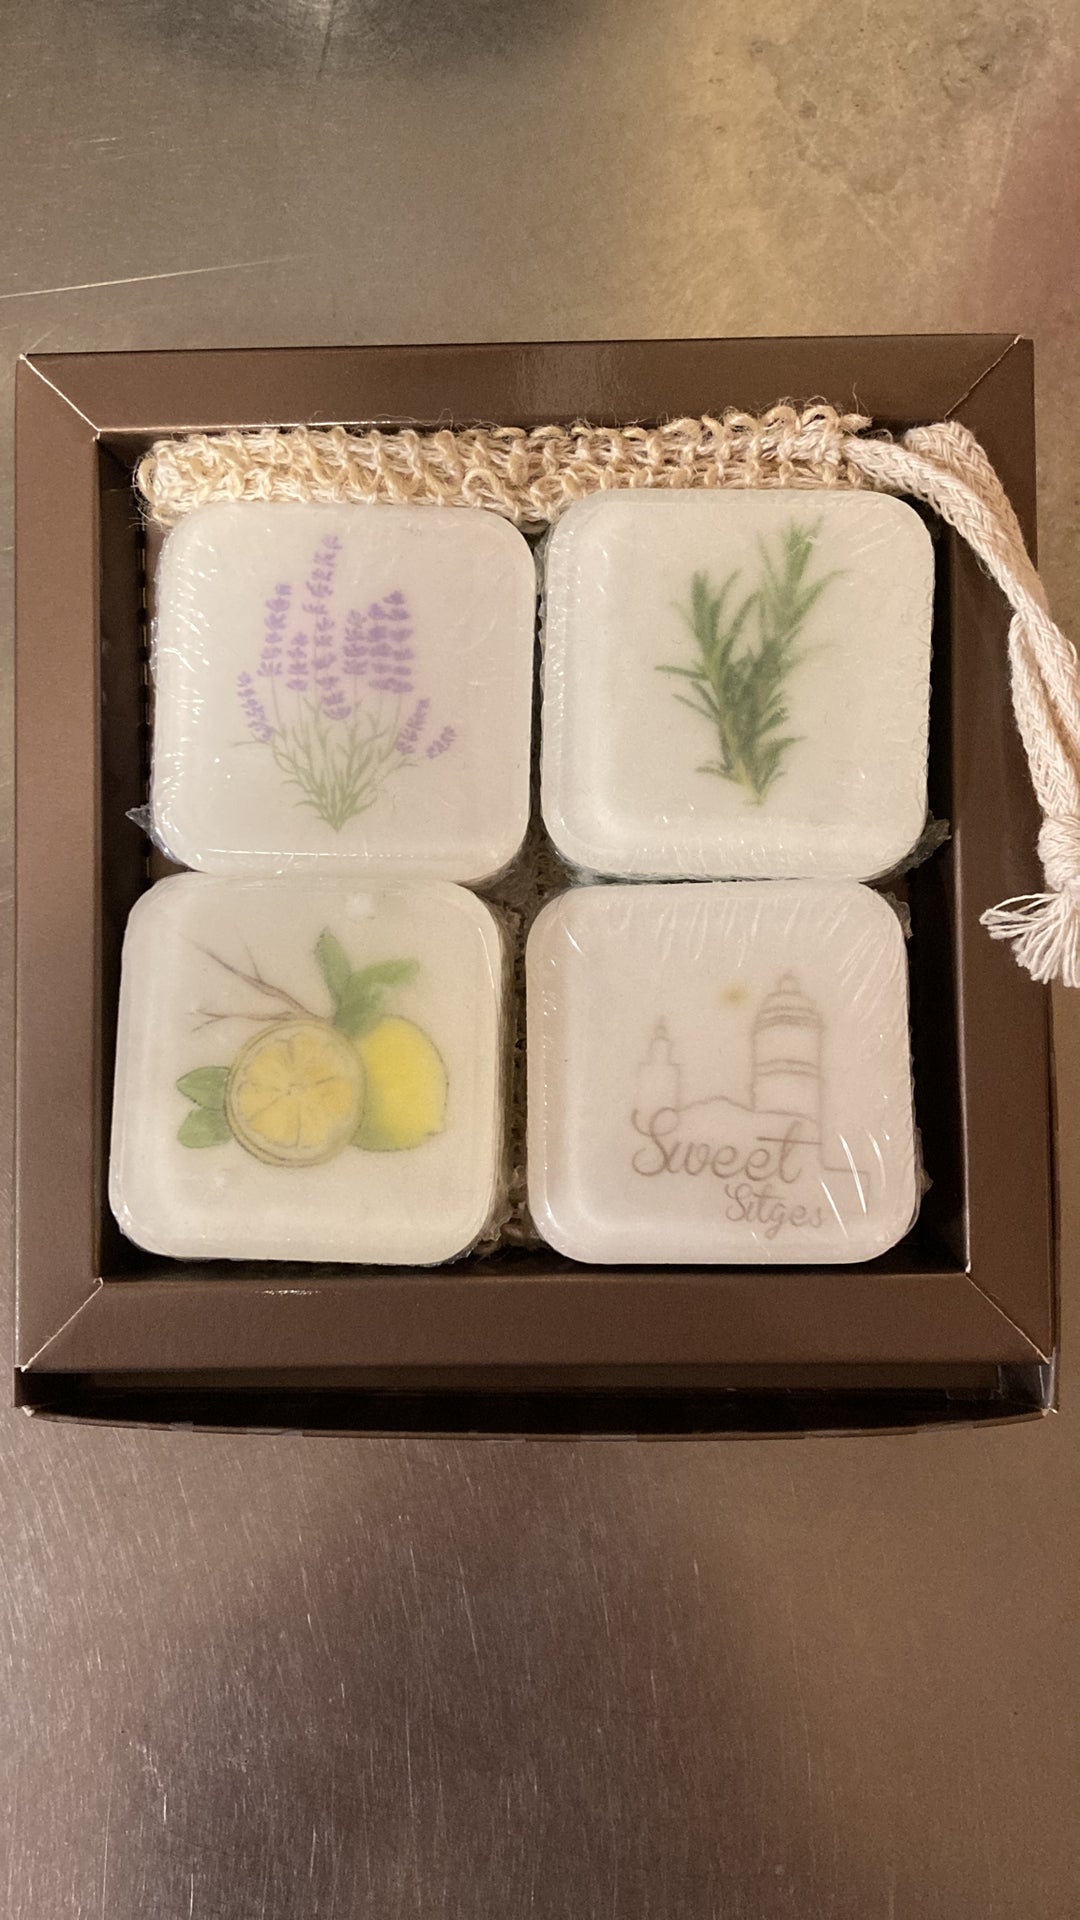 The Soapy Lab Gift Set